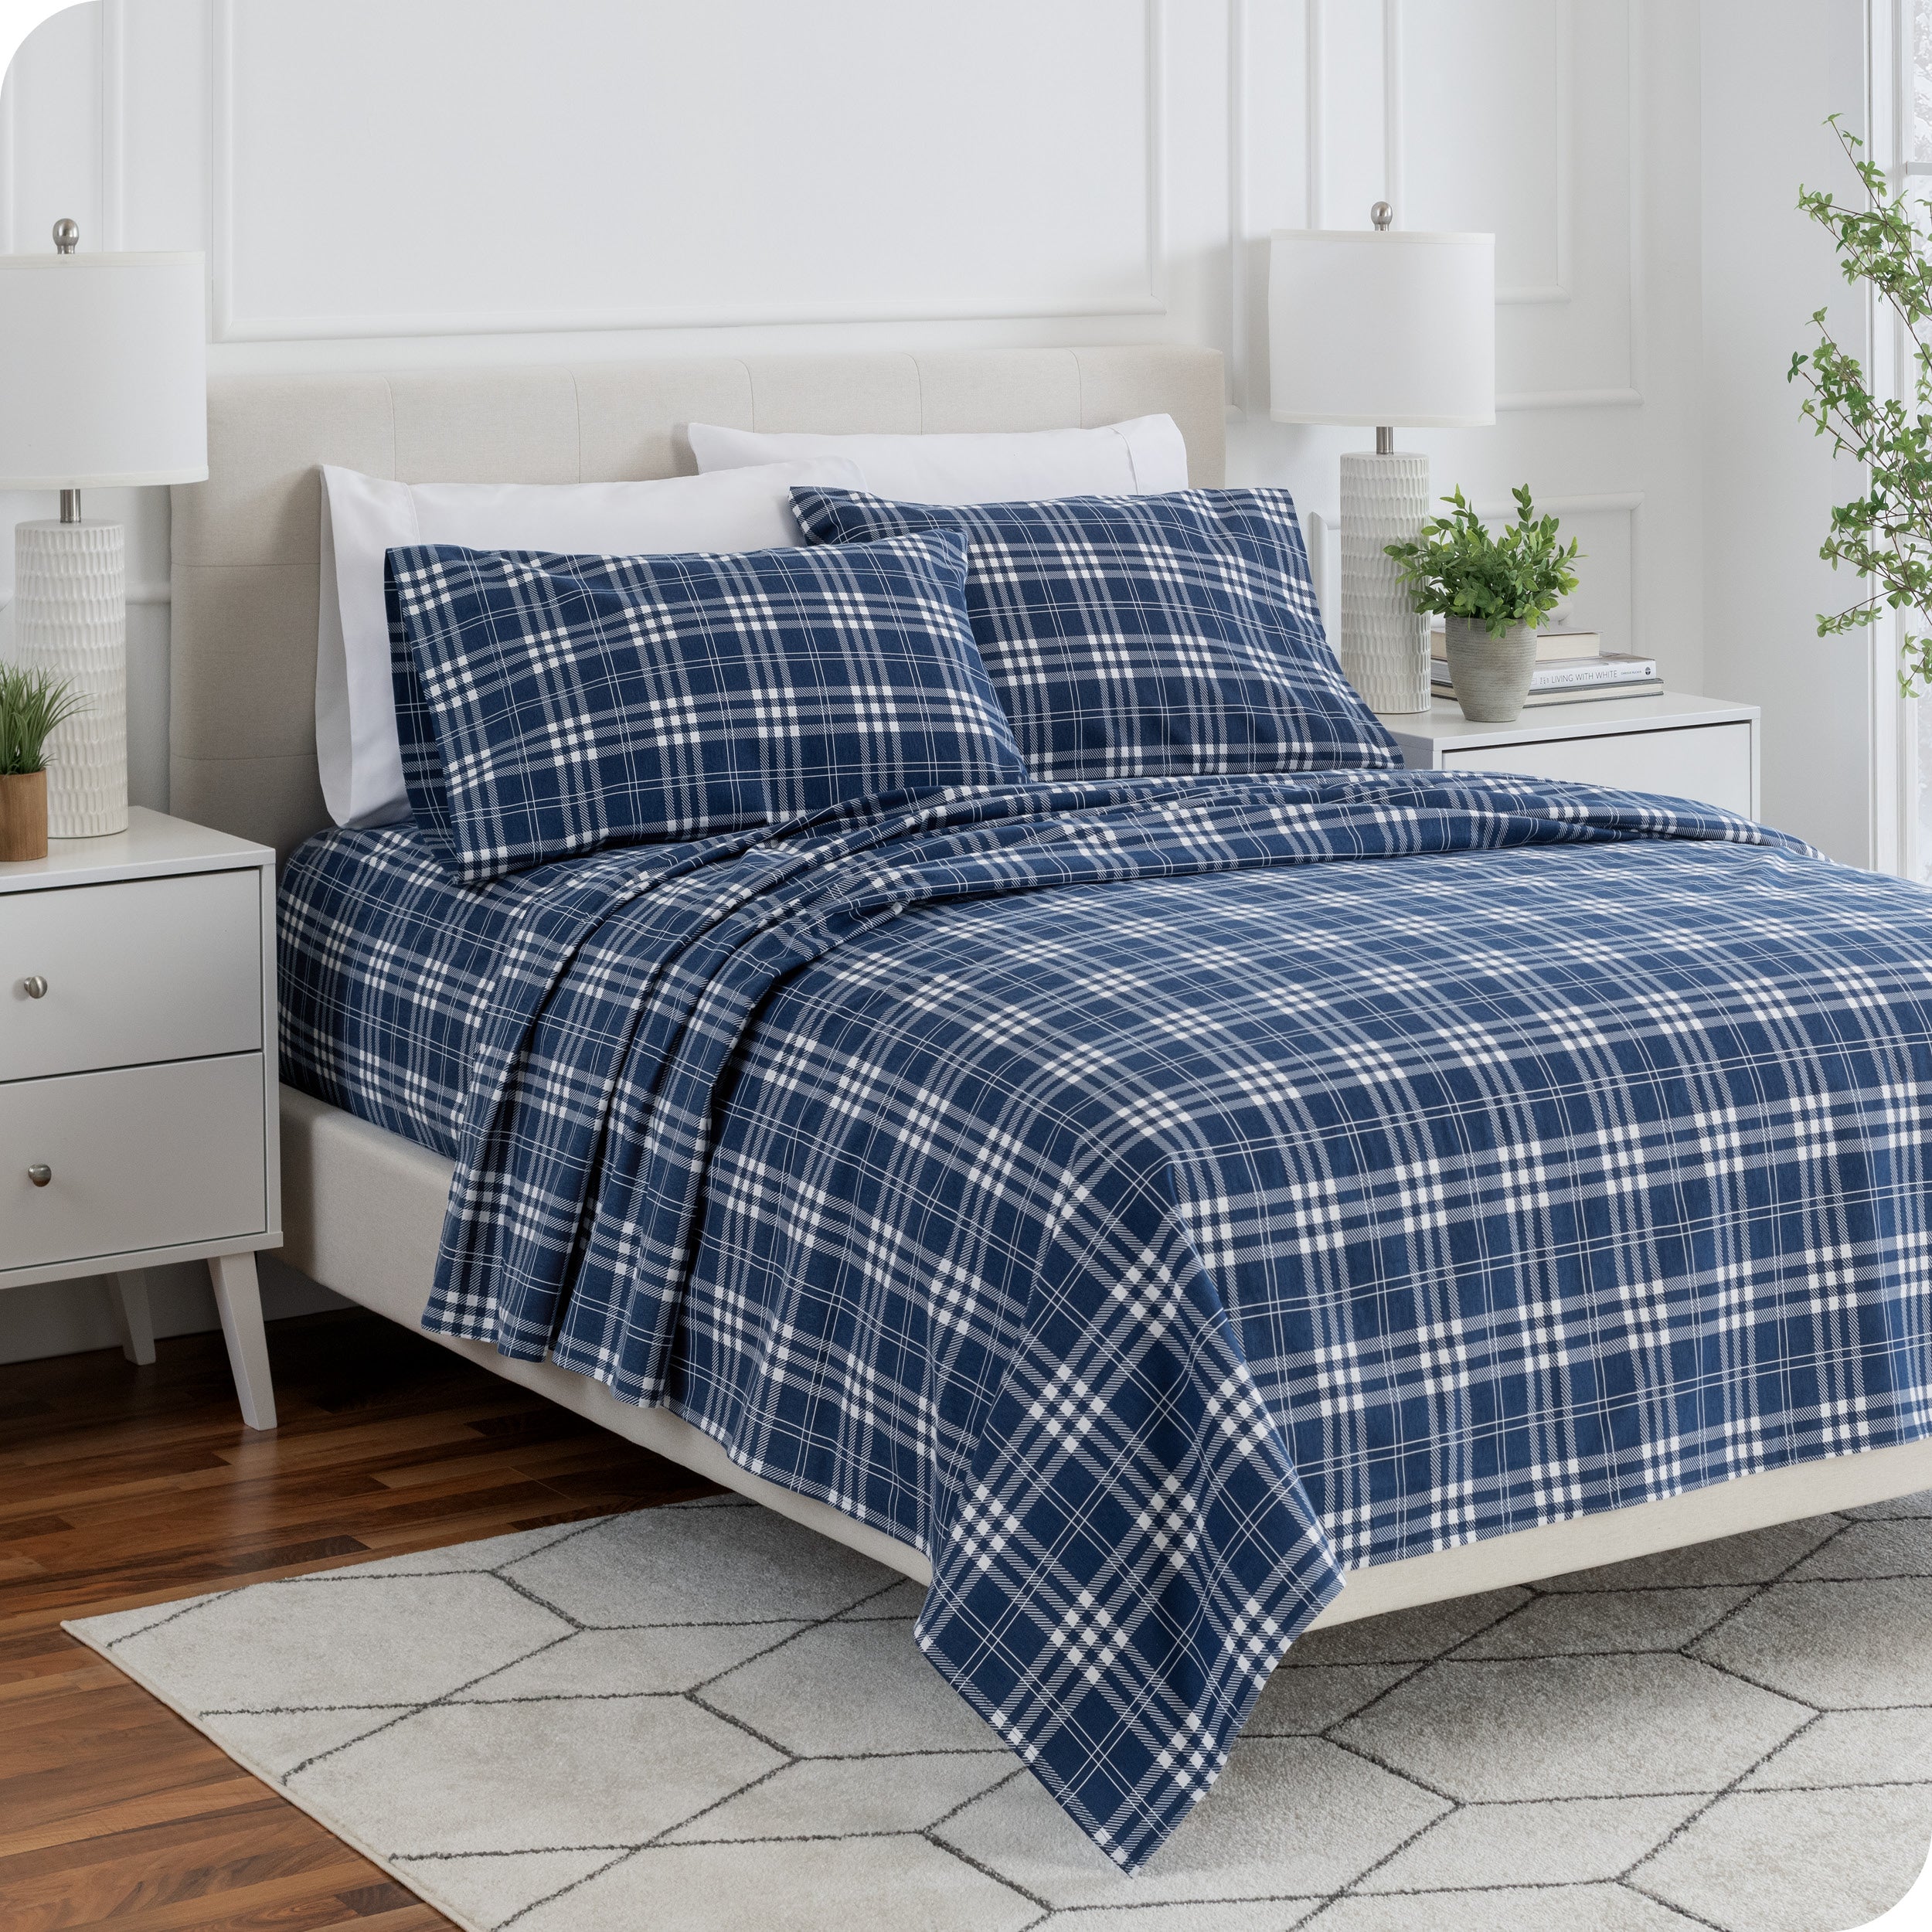 Flannel print sheets neatly spread across a bed